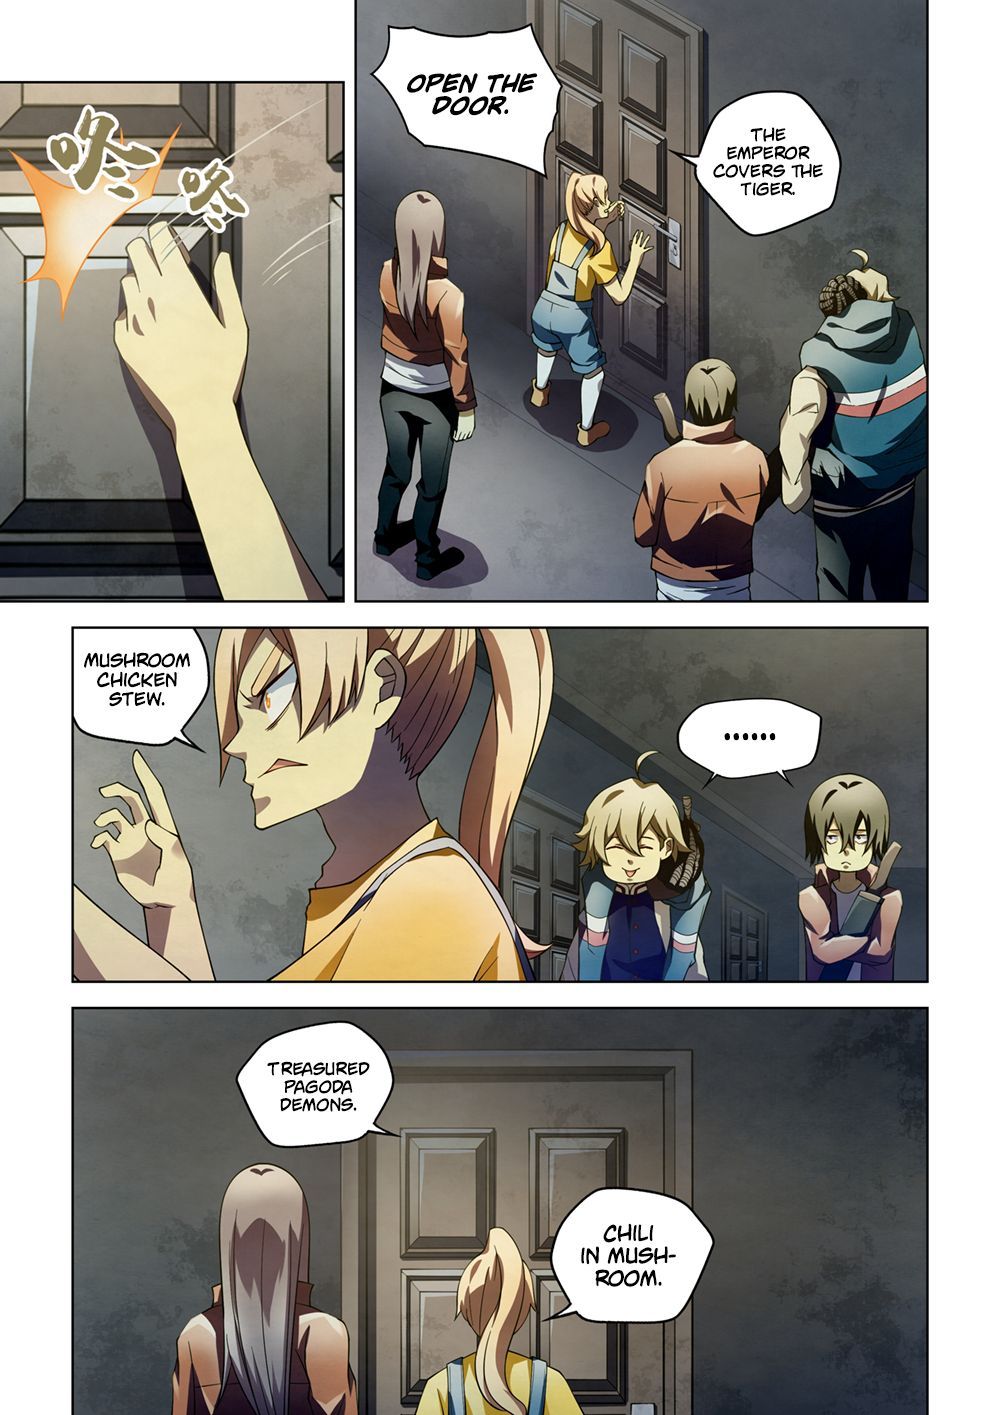 The Last Human Chapter 130 - Page 2